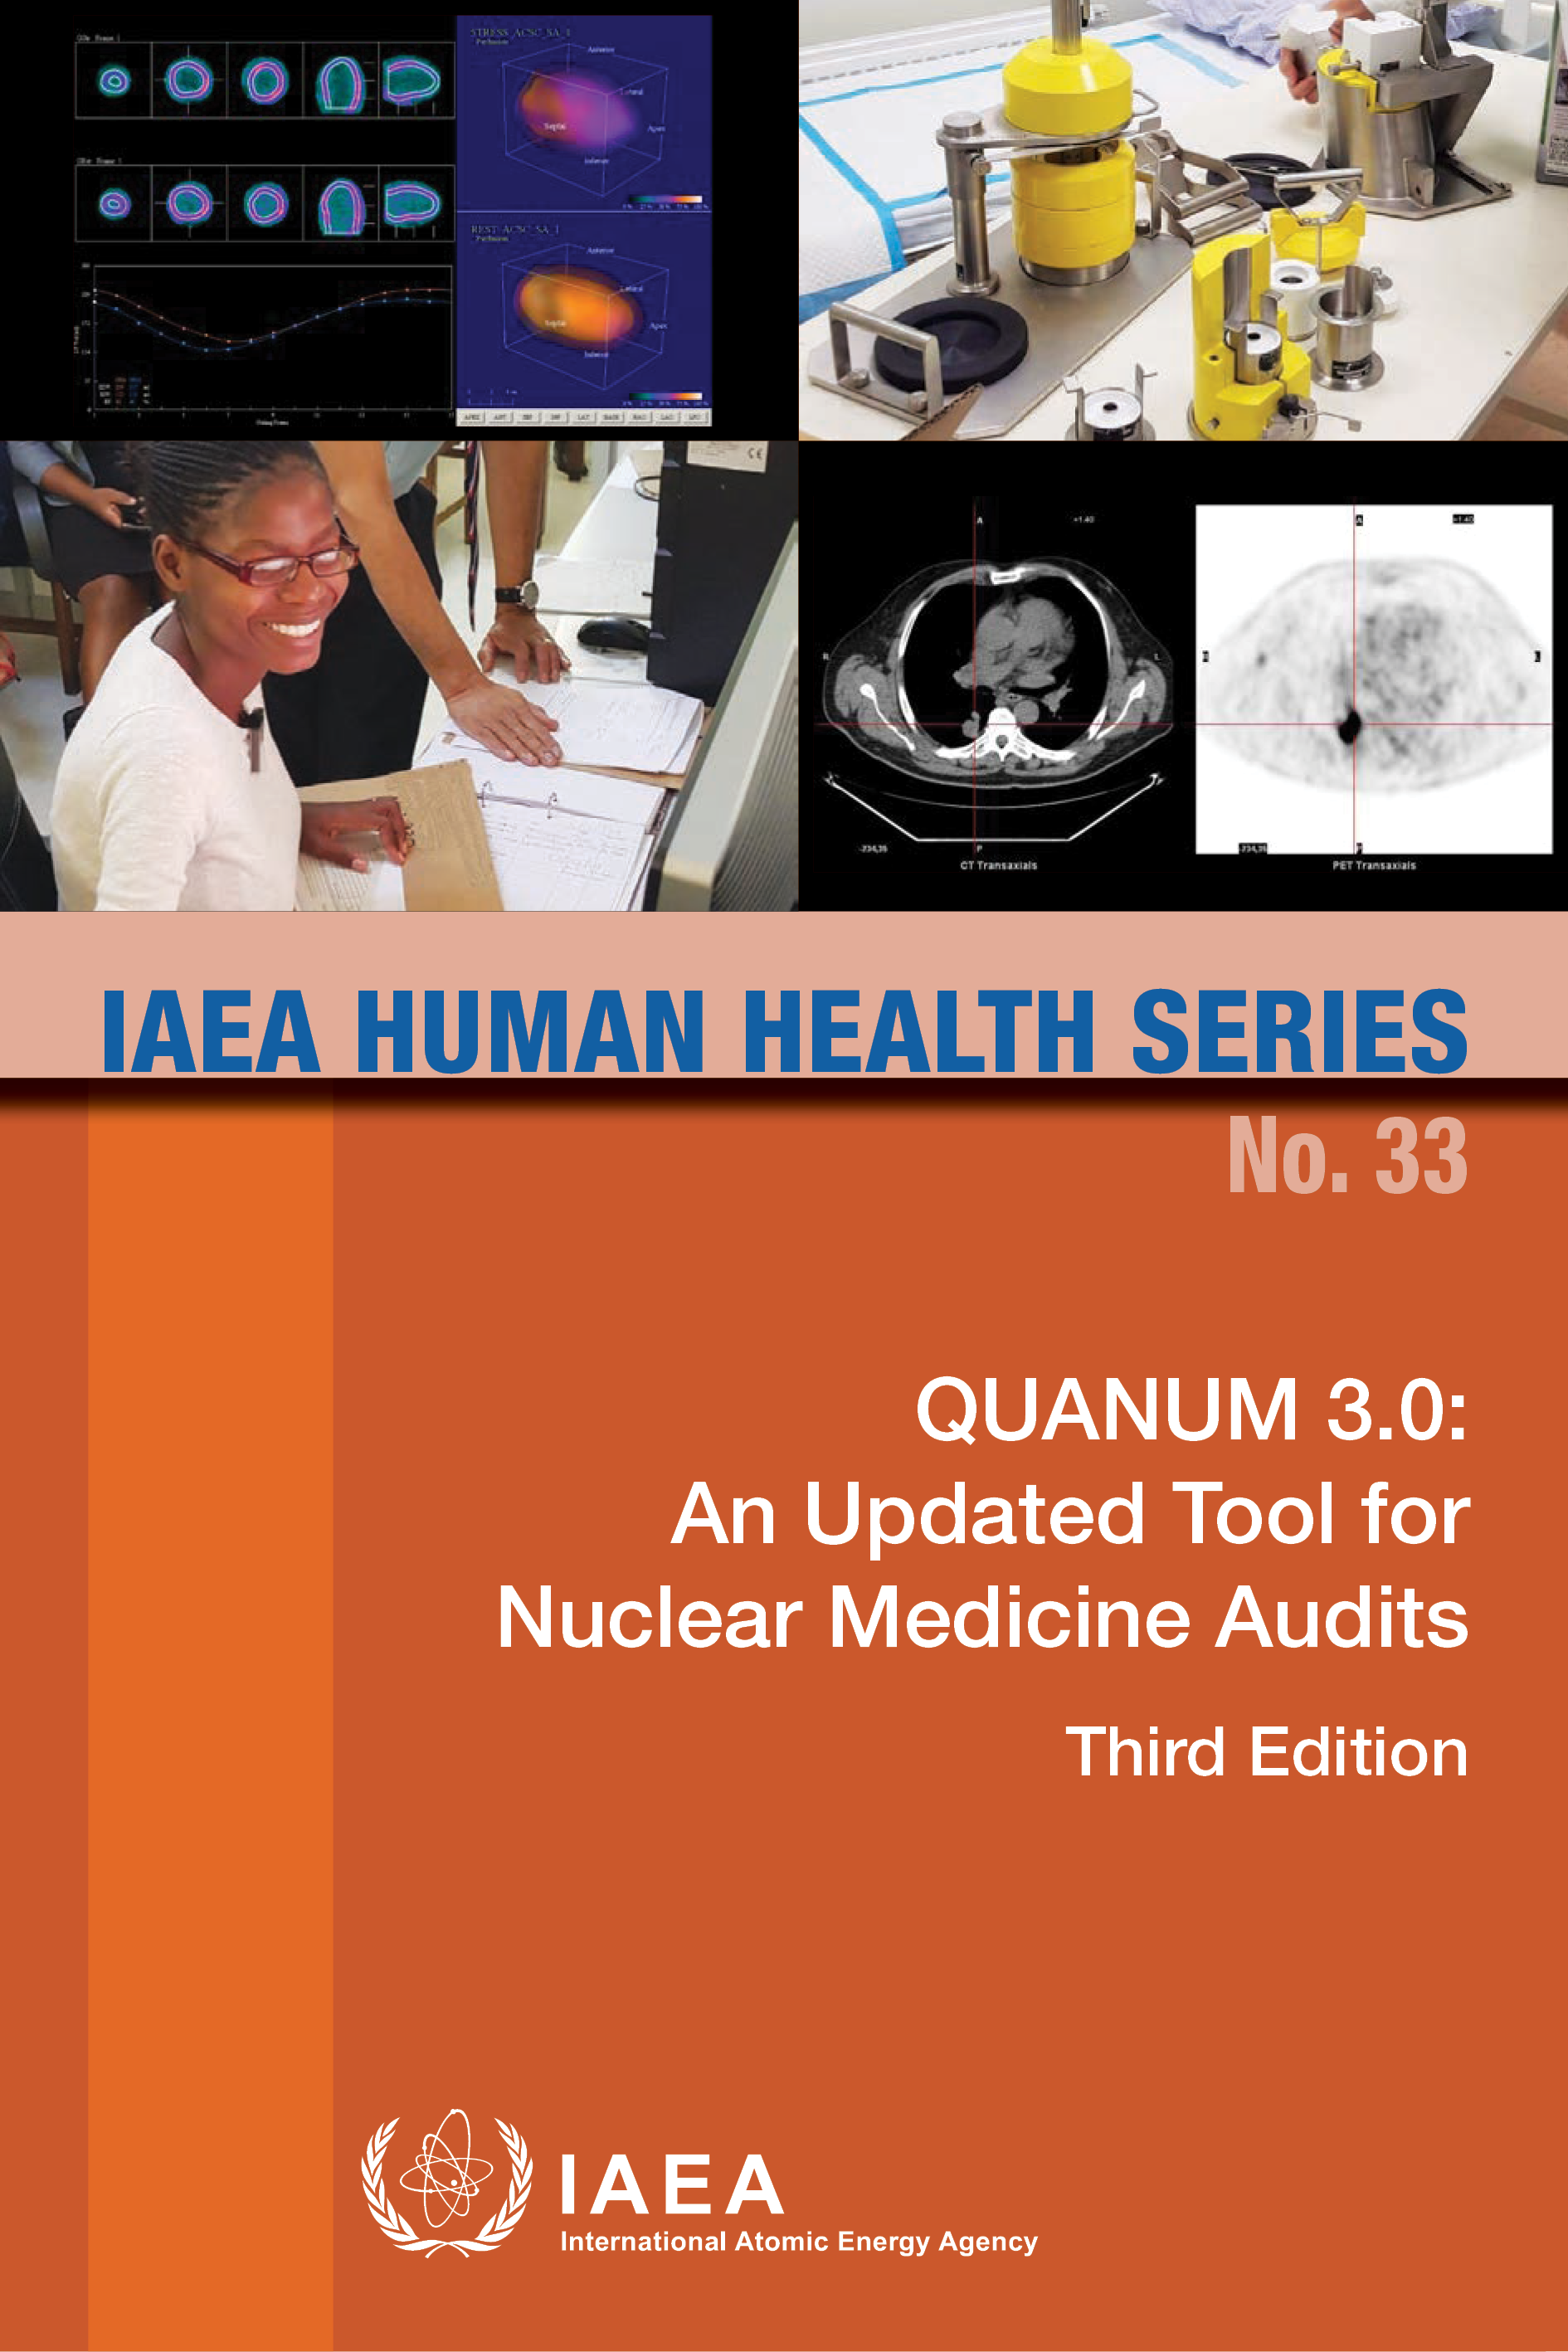 QUANUM 30 AN UPDATED TOOL FOR NUCLEAR MEDICINE AUDITS - photo 2